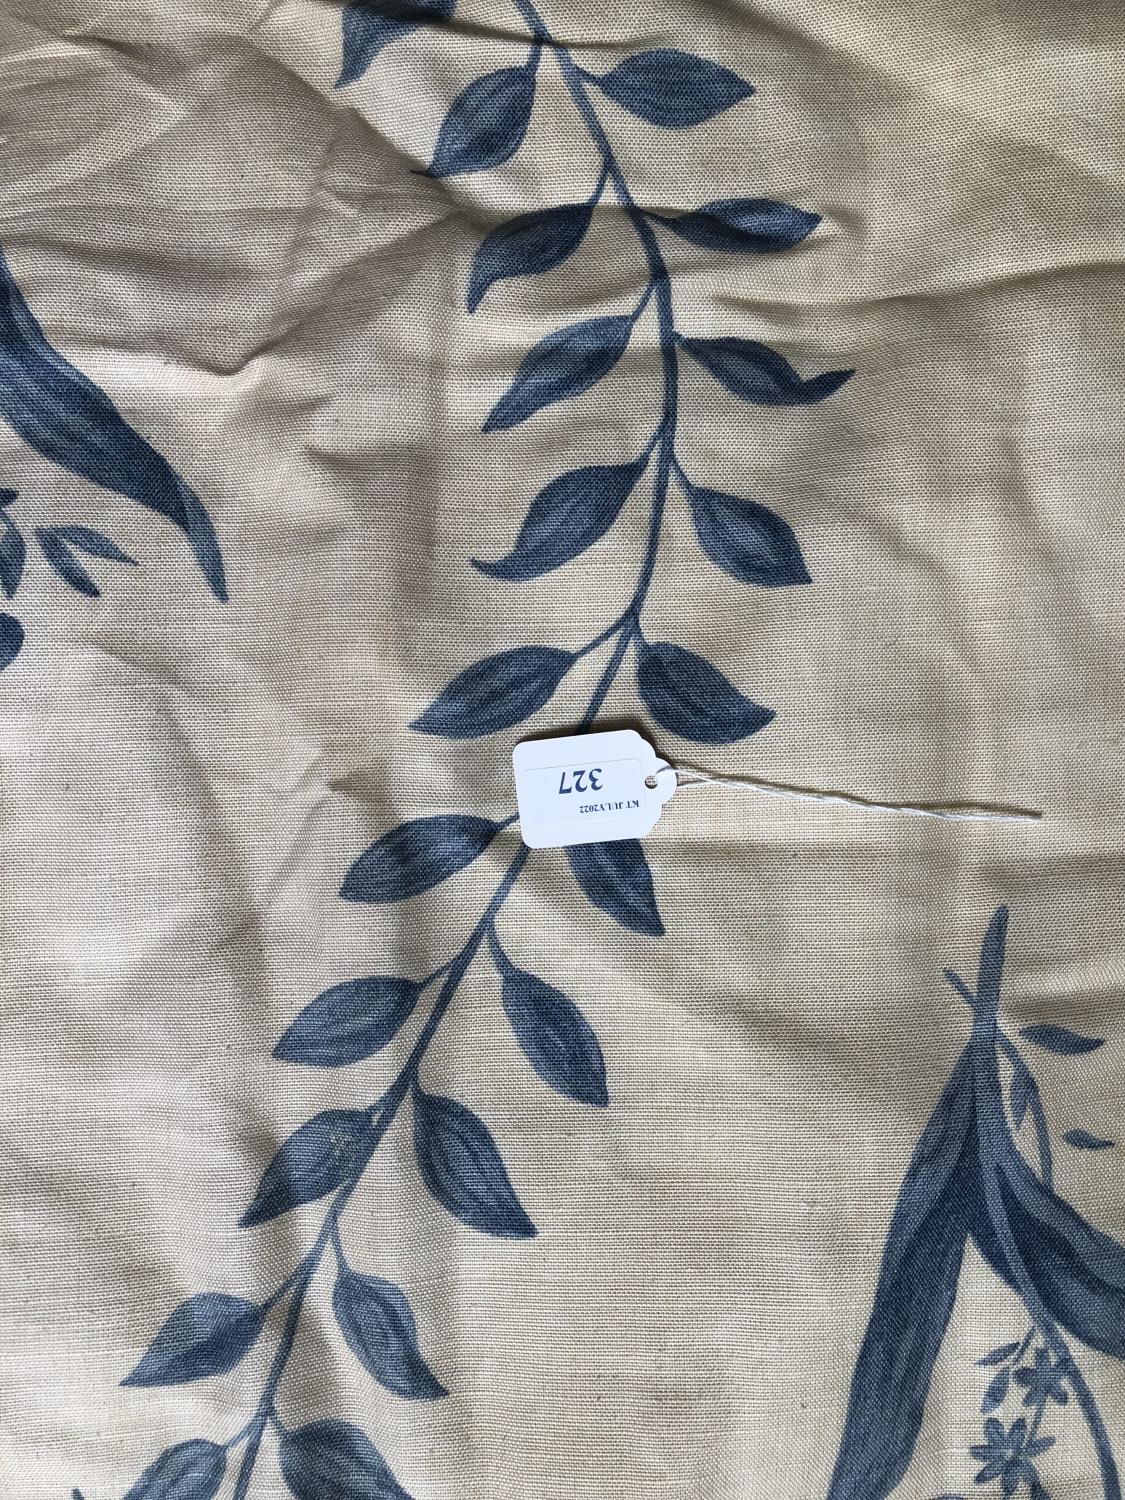 Pair cream curtains with blue floral pattern and tie backs, lined and interlined, 237 drop, 192cm - Image 4 of 4